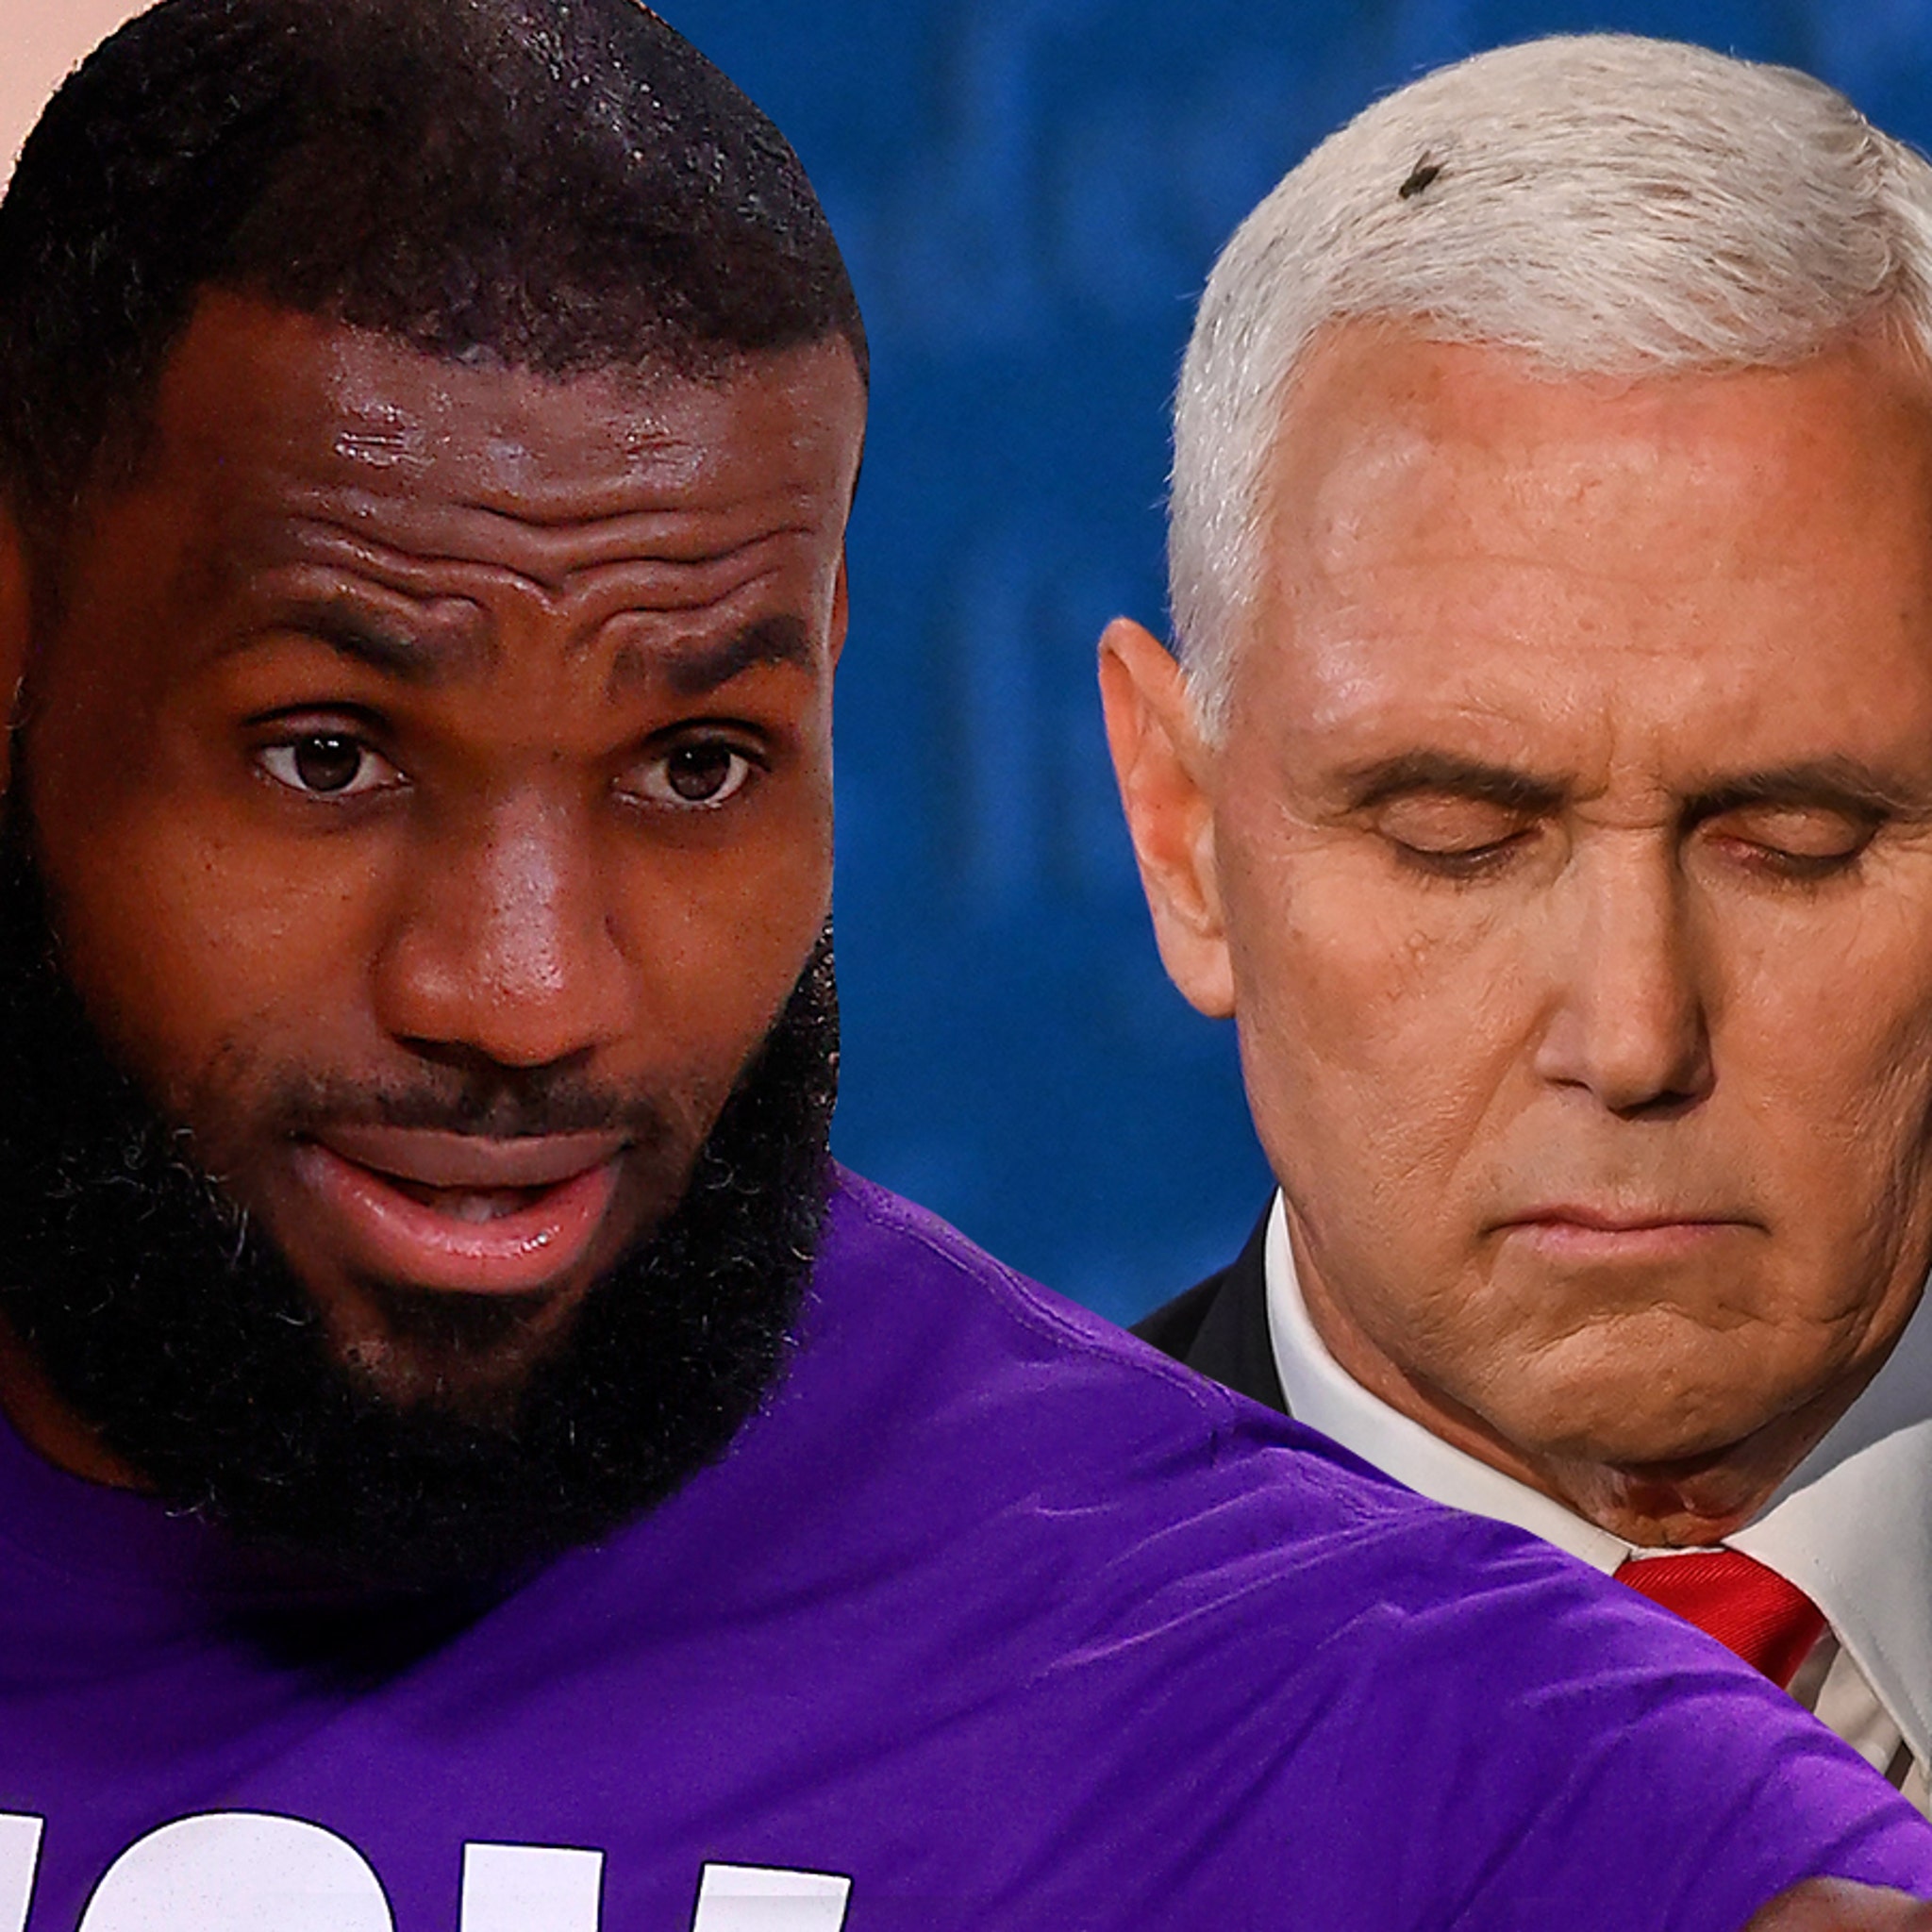 Lakers' LeBron James takes aim at Mike Pence using viral fly